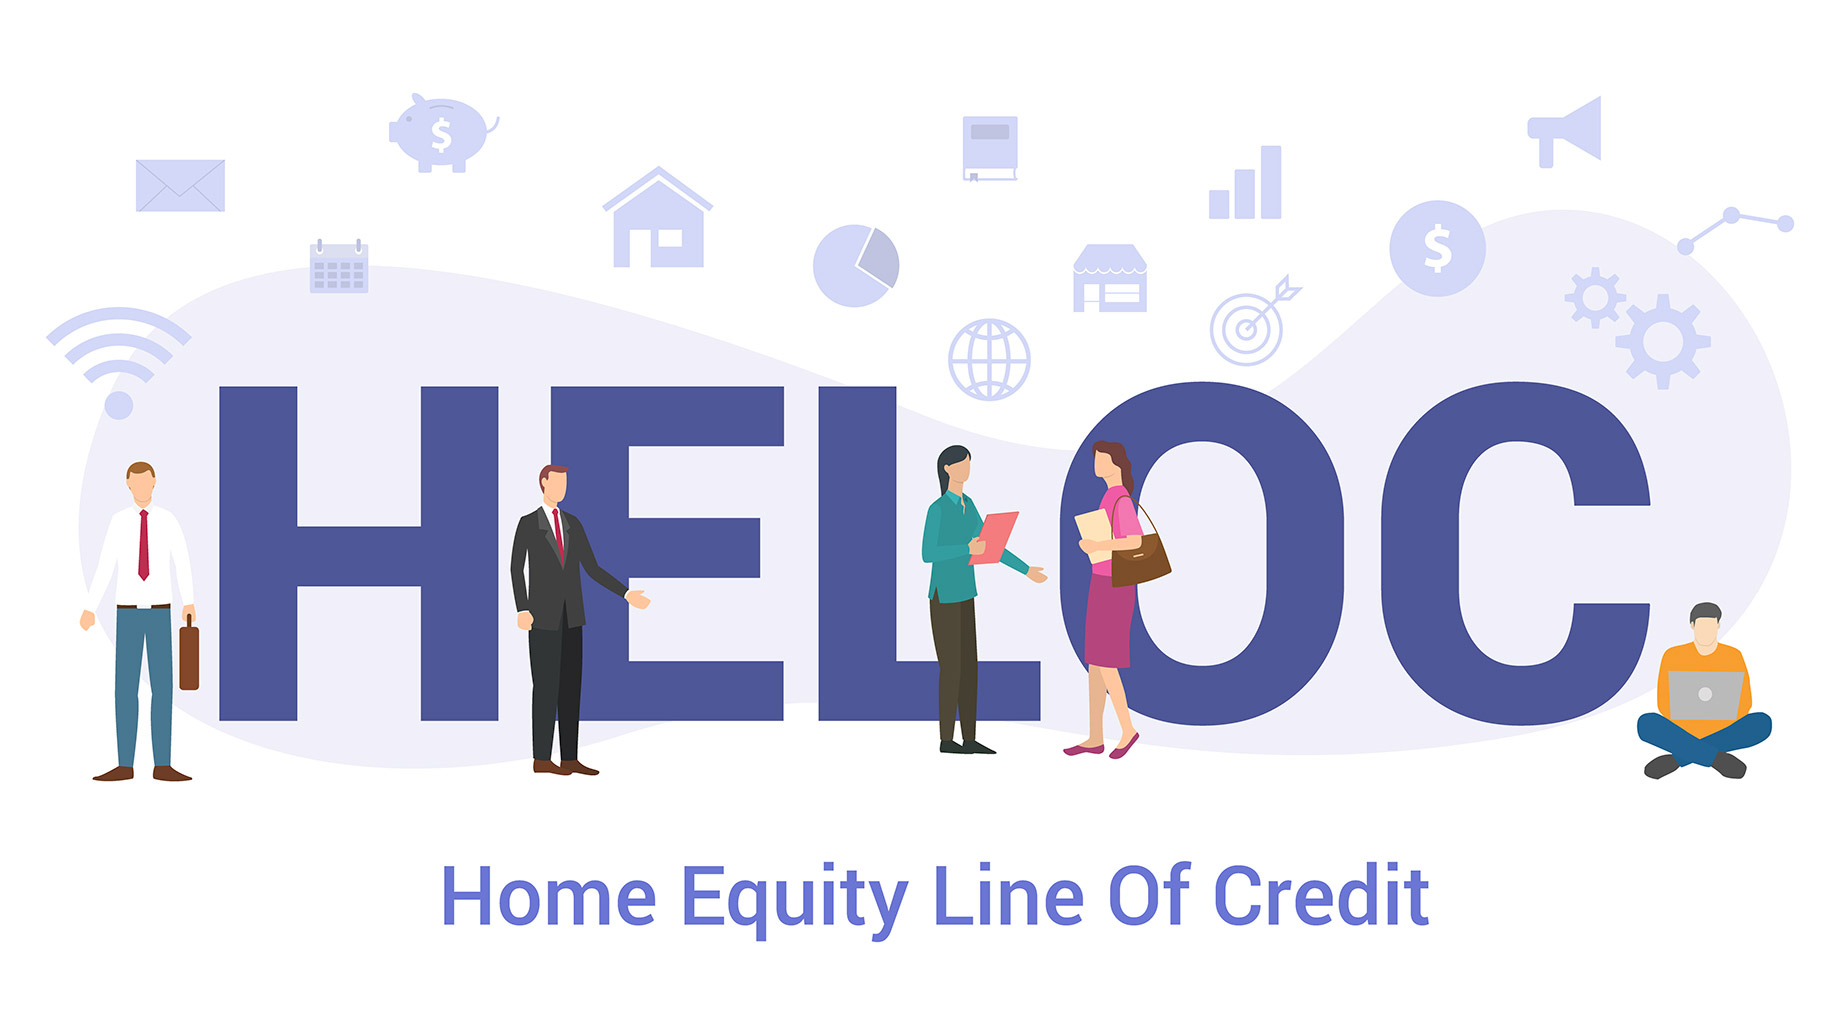 HELOC - Home Equity Line Of Credit